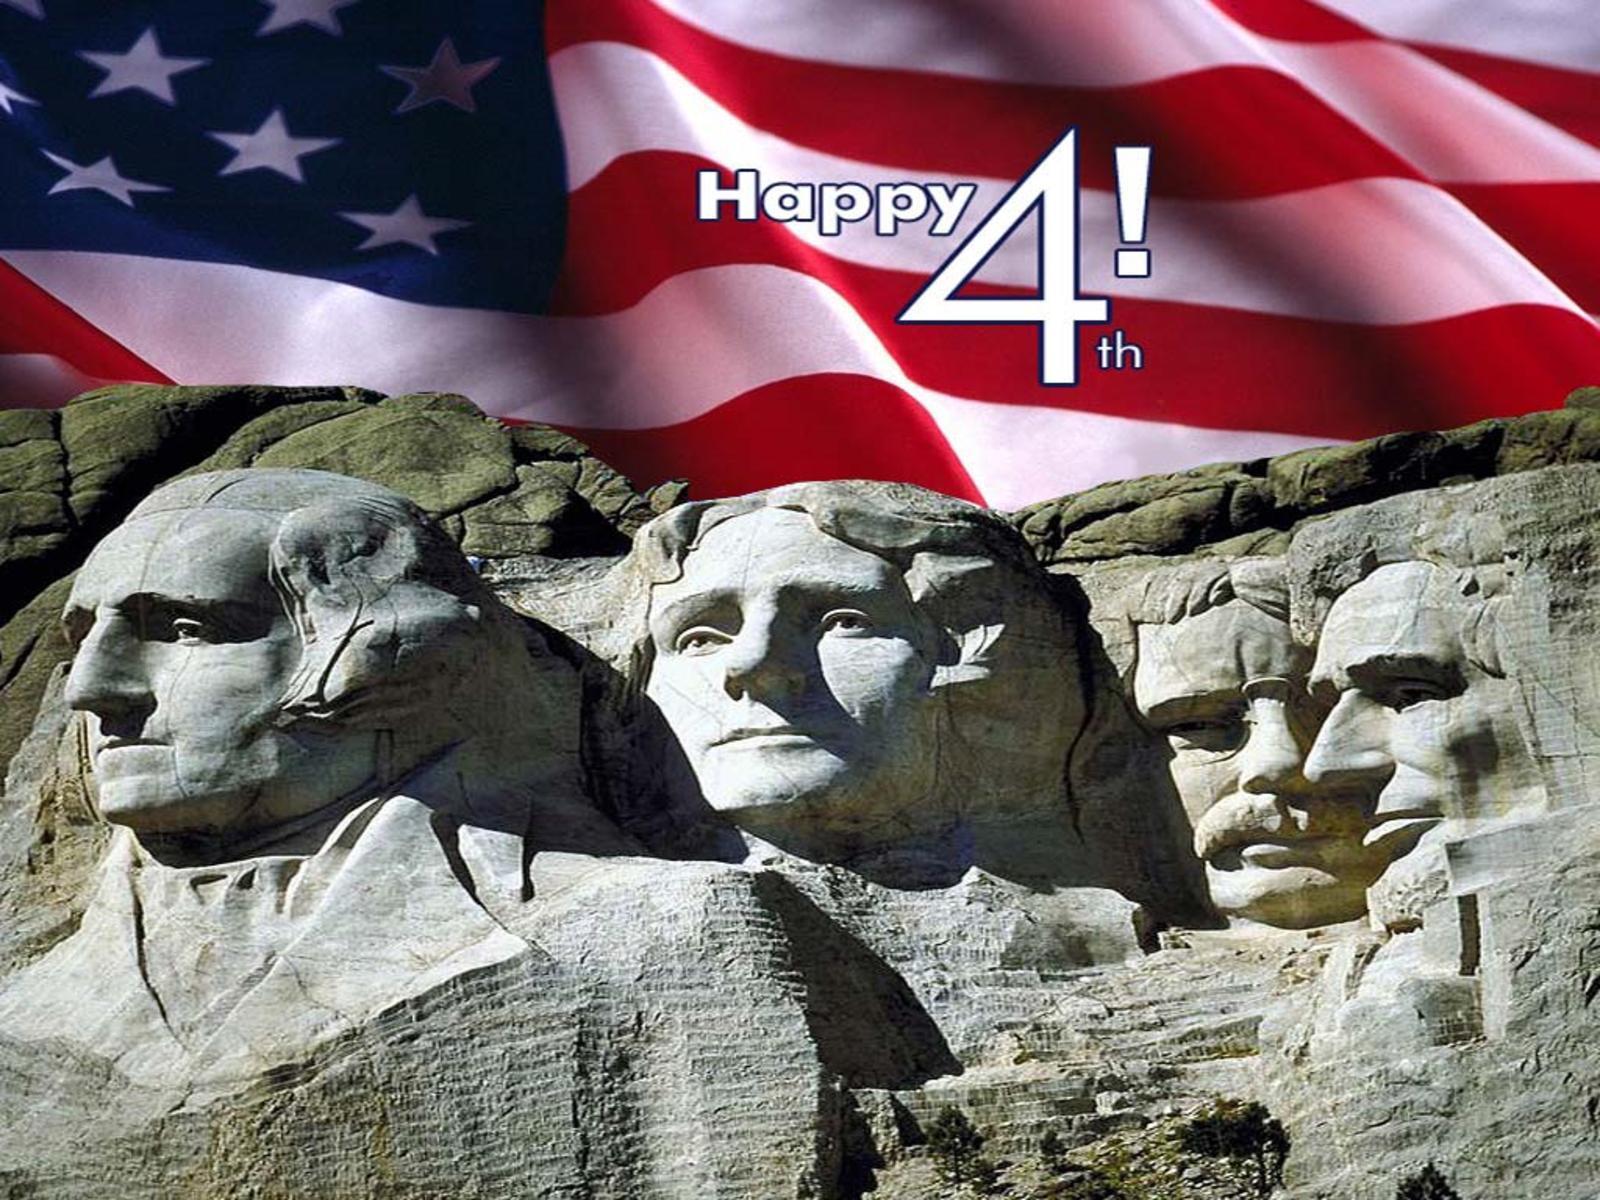 Mont Rushmore happy 4th July free desktop background